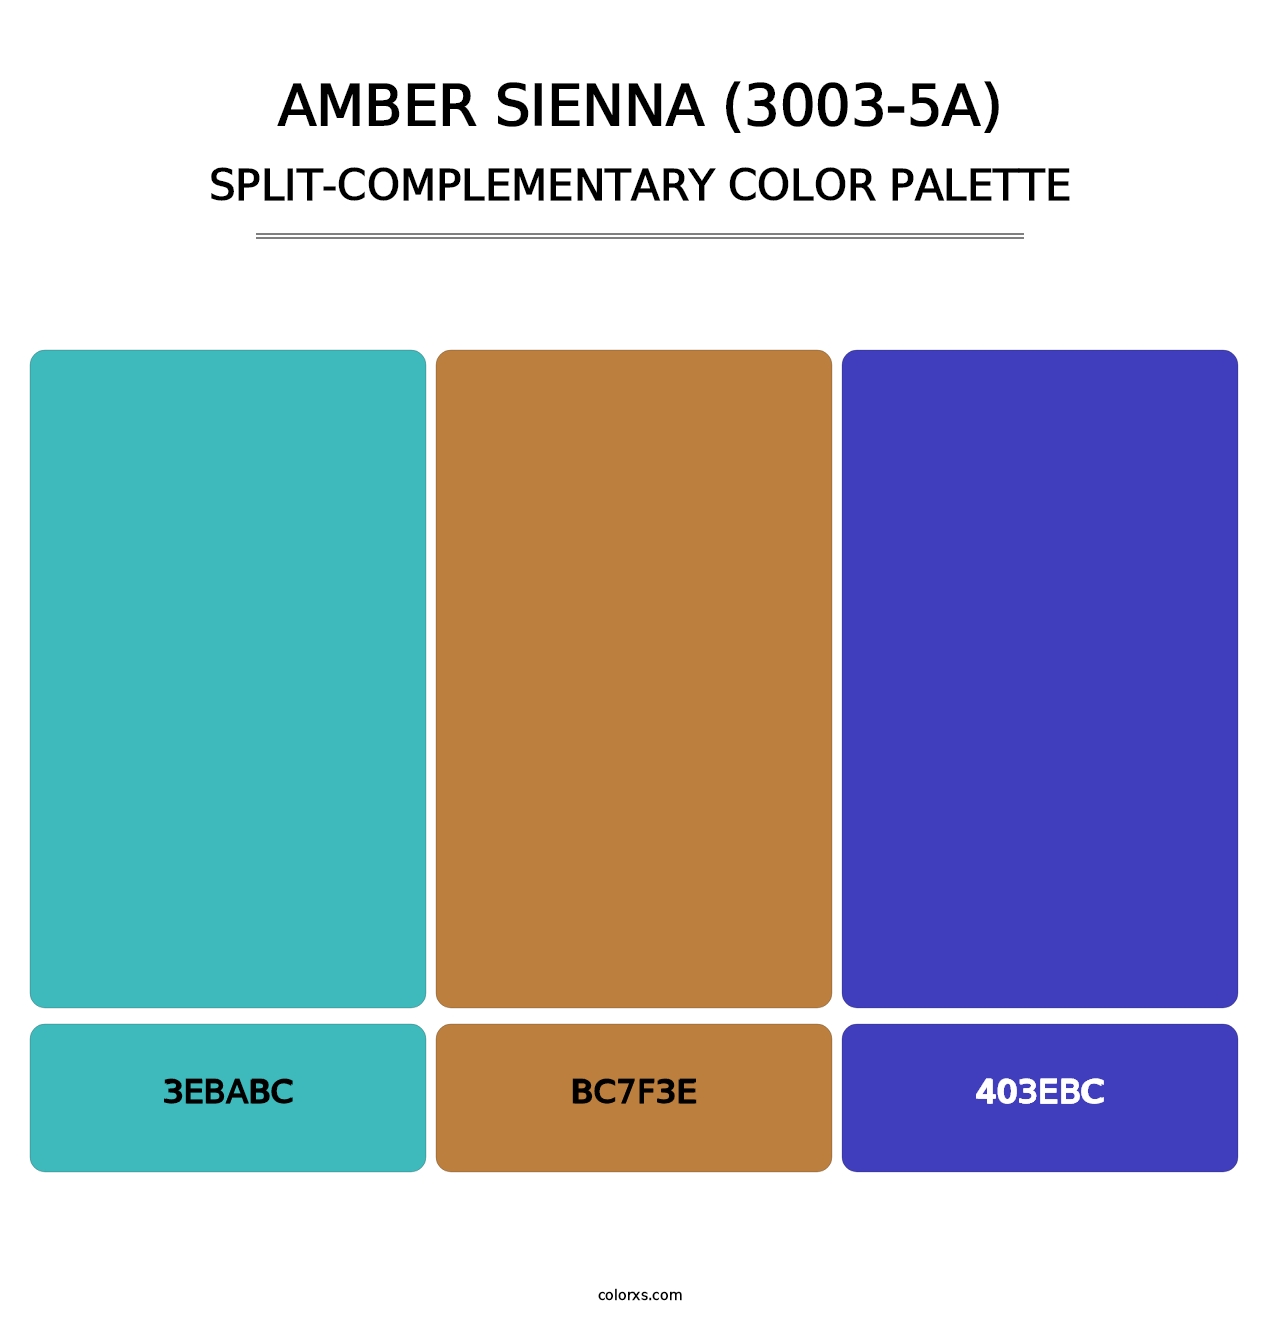 Amber Sienna (3003-5A) - Split-Complementary Color Palette